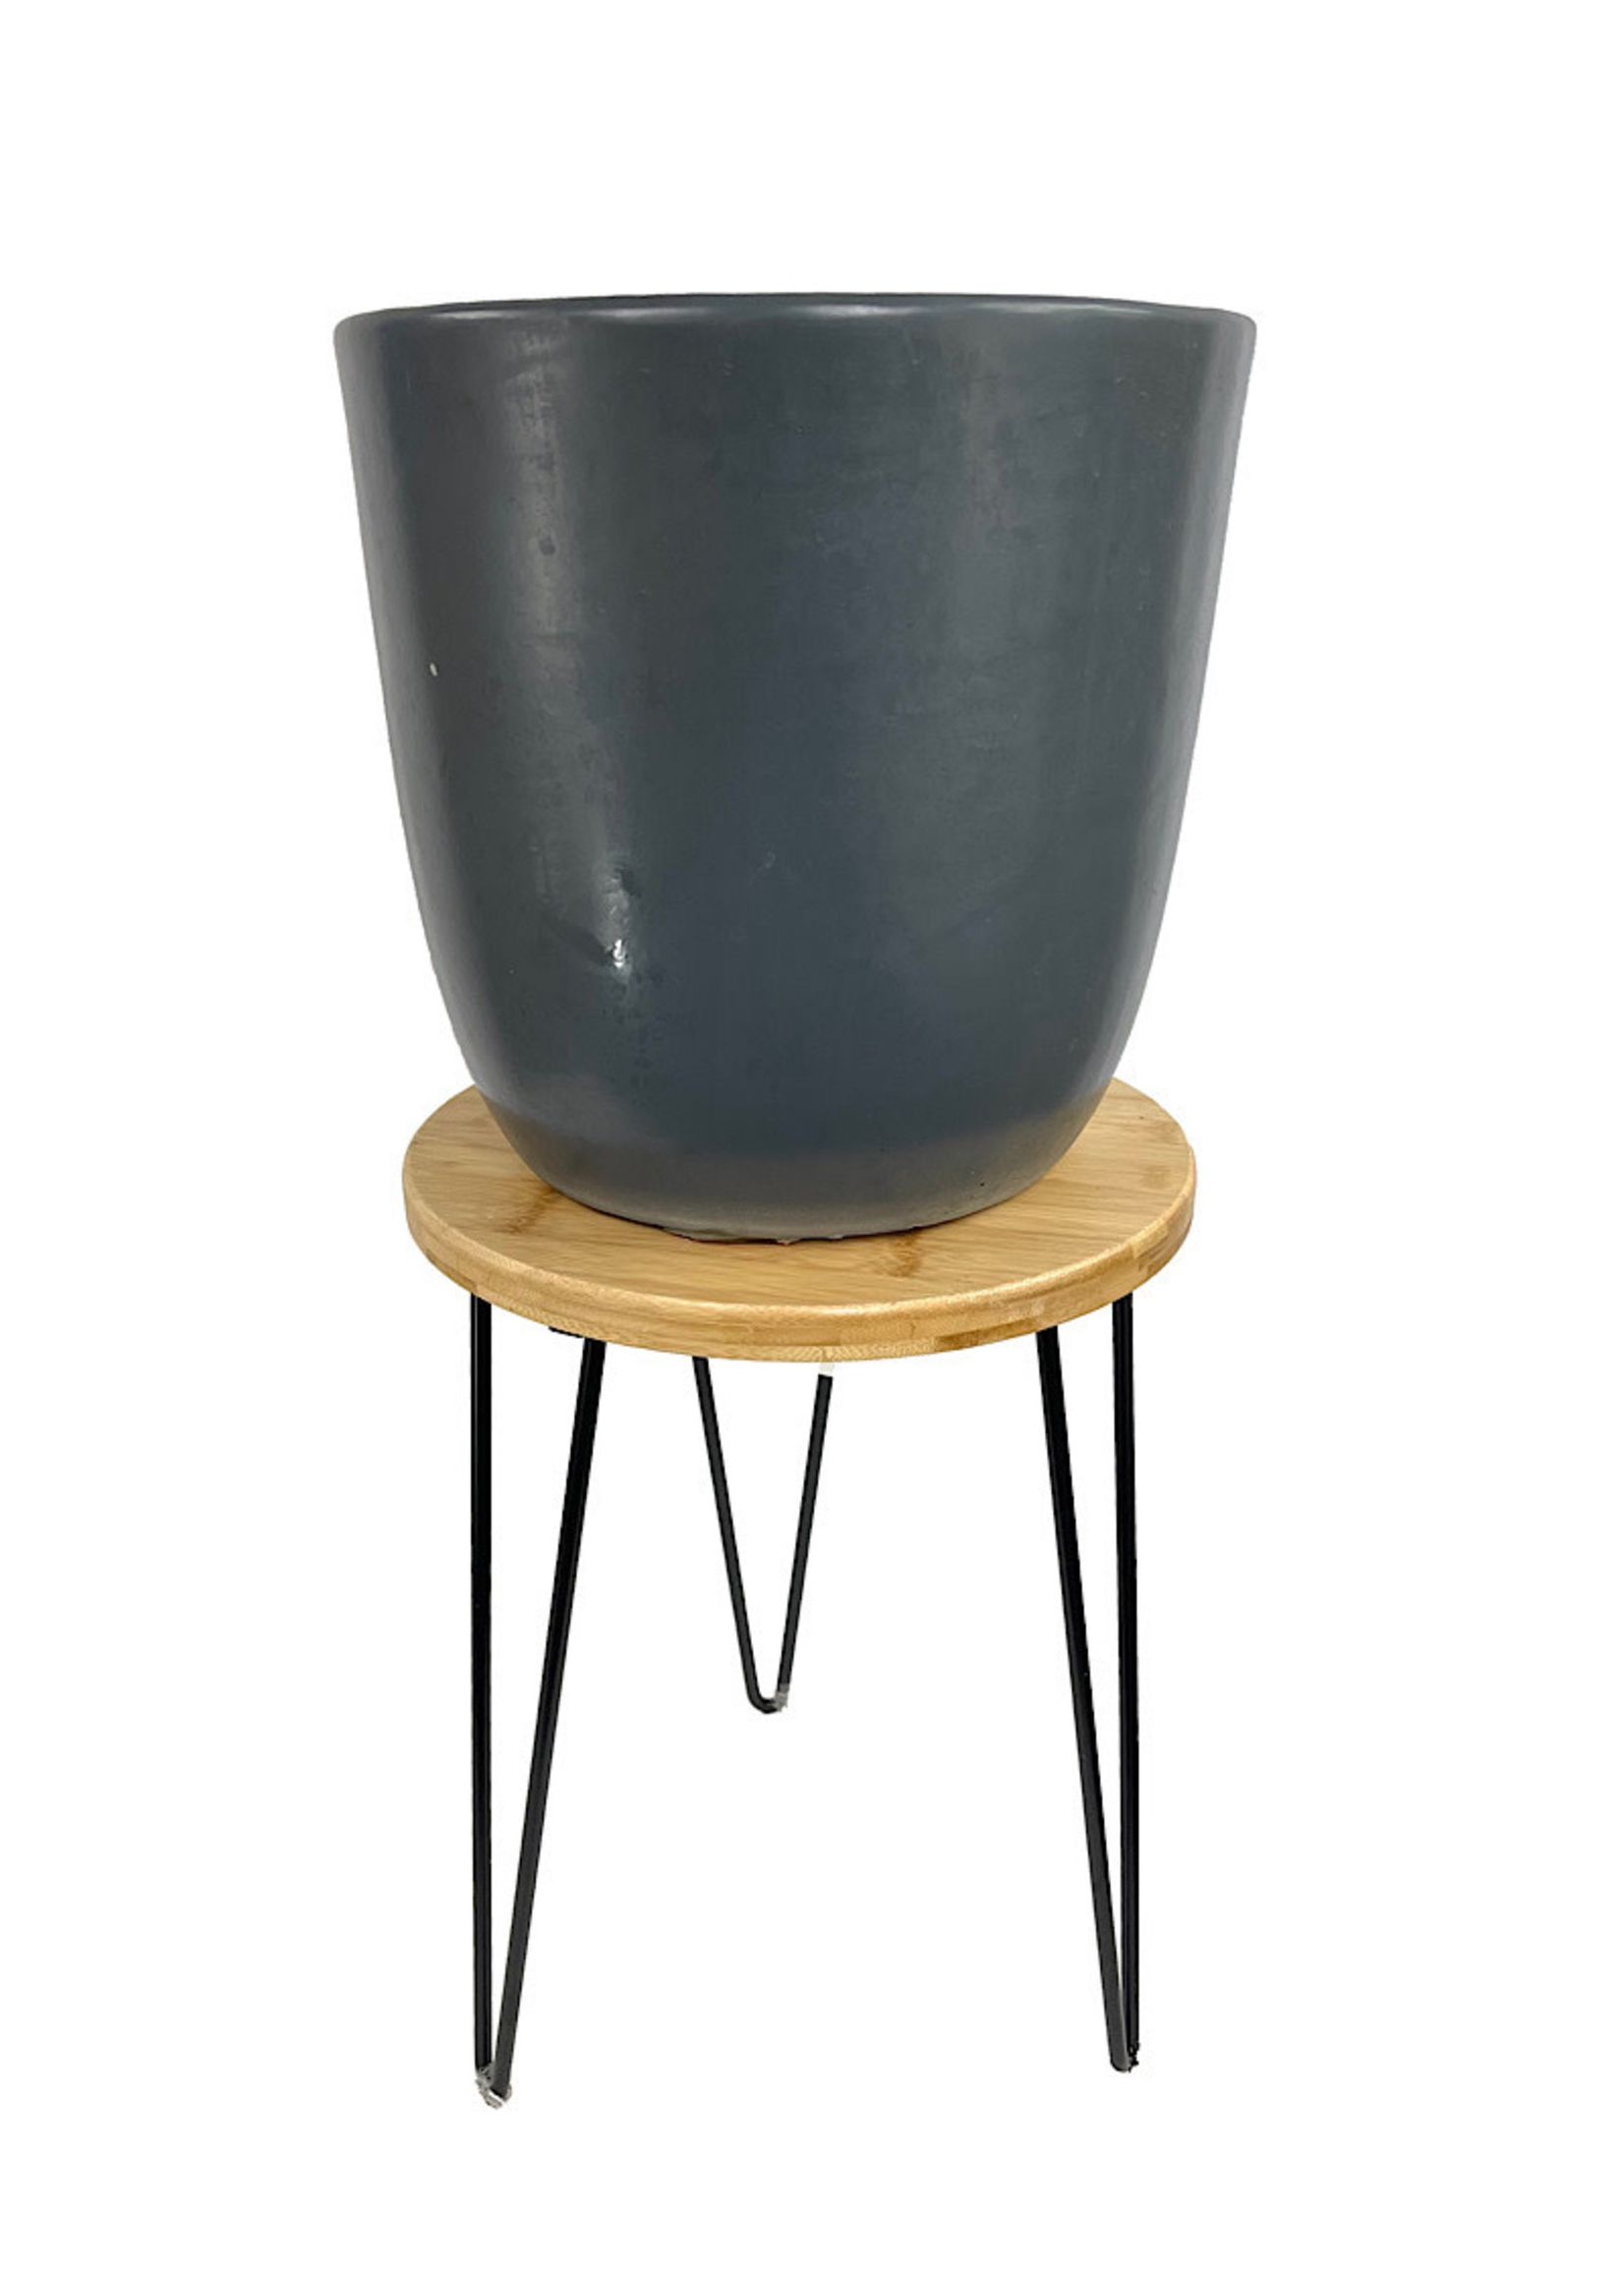 Preferred 16 Inch Plant Stands Regarding Wire And Bamboo Wood Plant Stand 16 Inch – The Garden Corner (View 2 of 10)